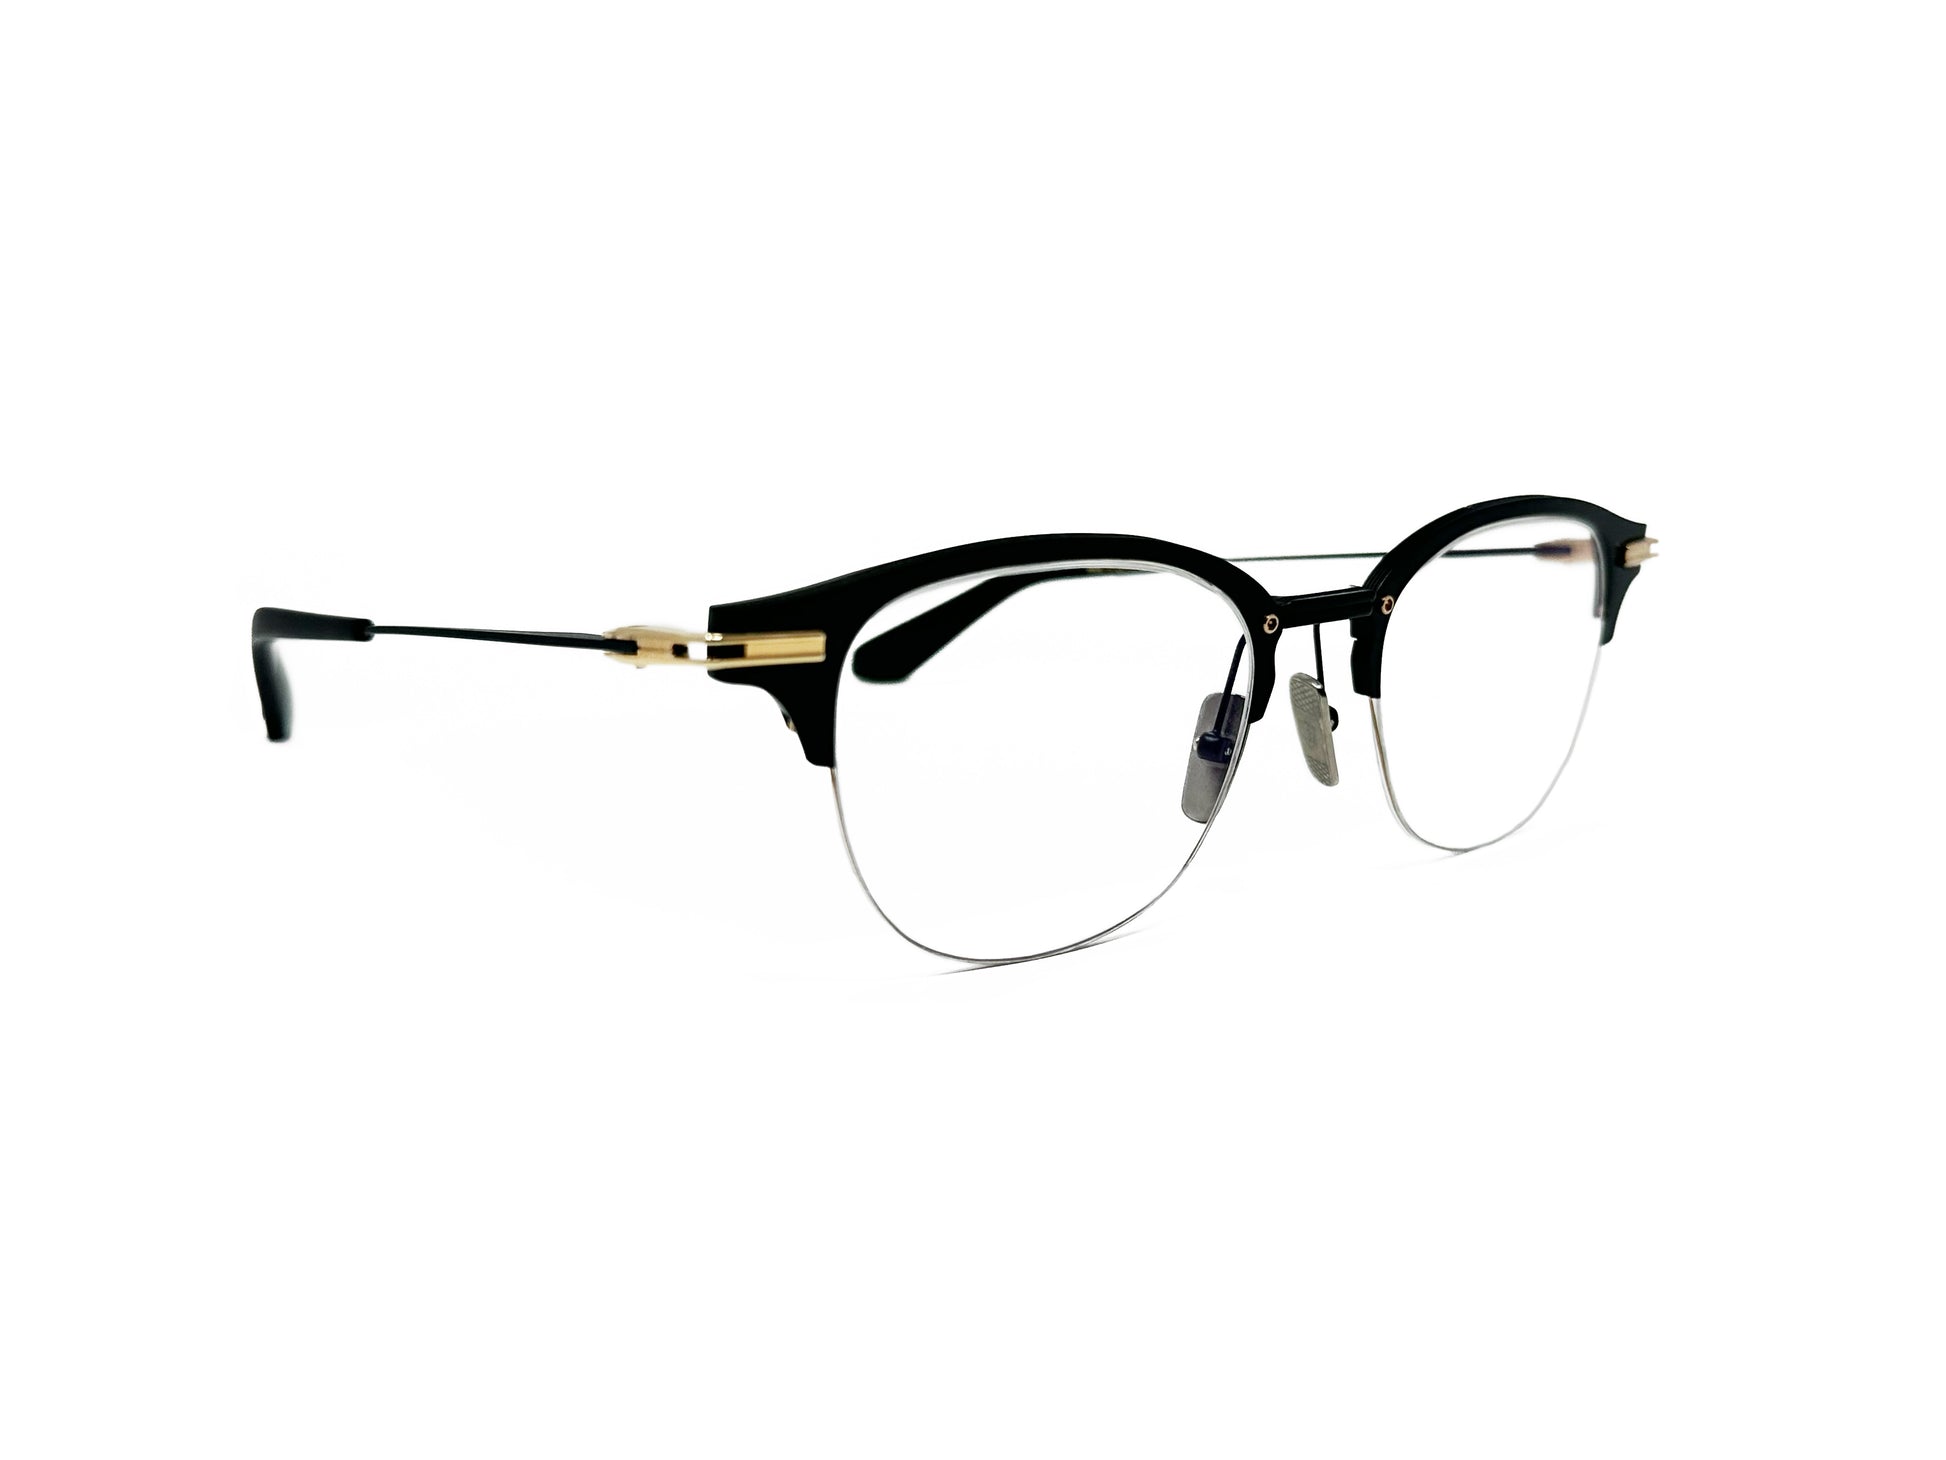 Dita Eyewear half-rim, clubmaster-style, metal, optical frame. Model: Iambic. Color: 03 - Black and gold. Side view.